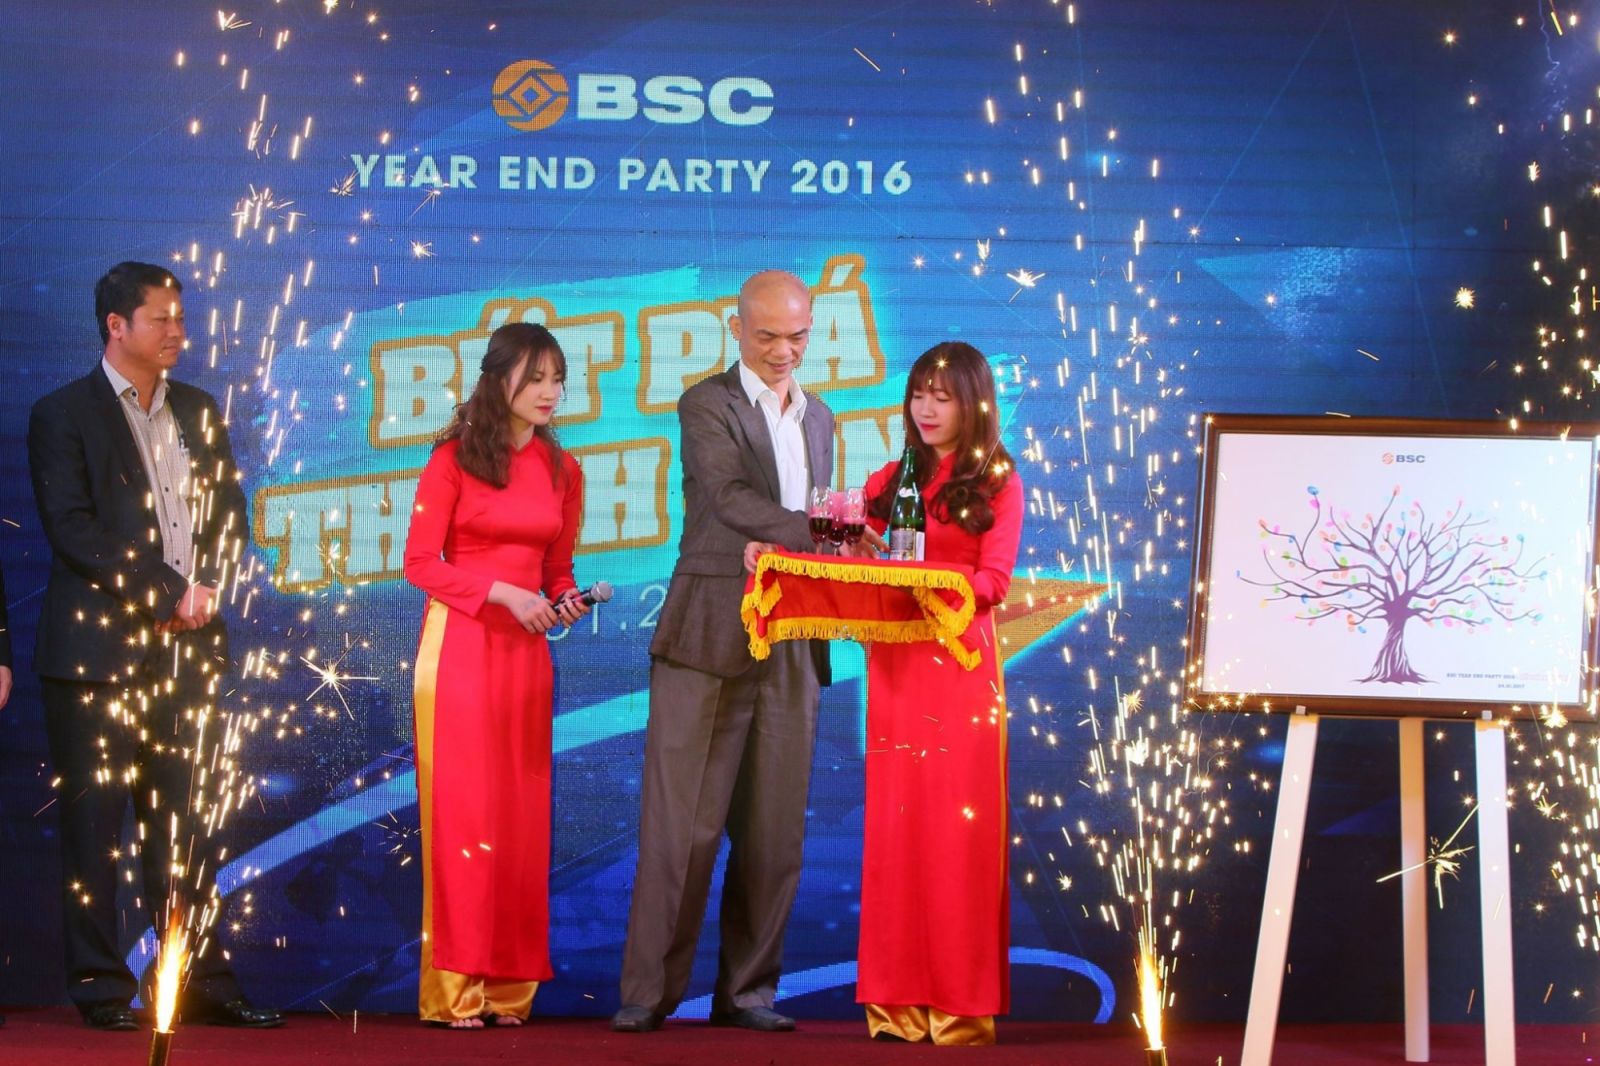 BSC YEAR END PARTY 2016